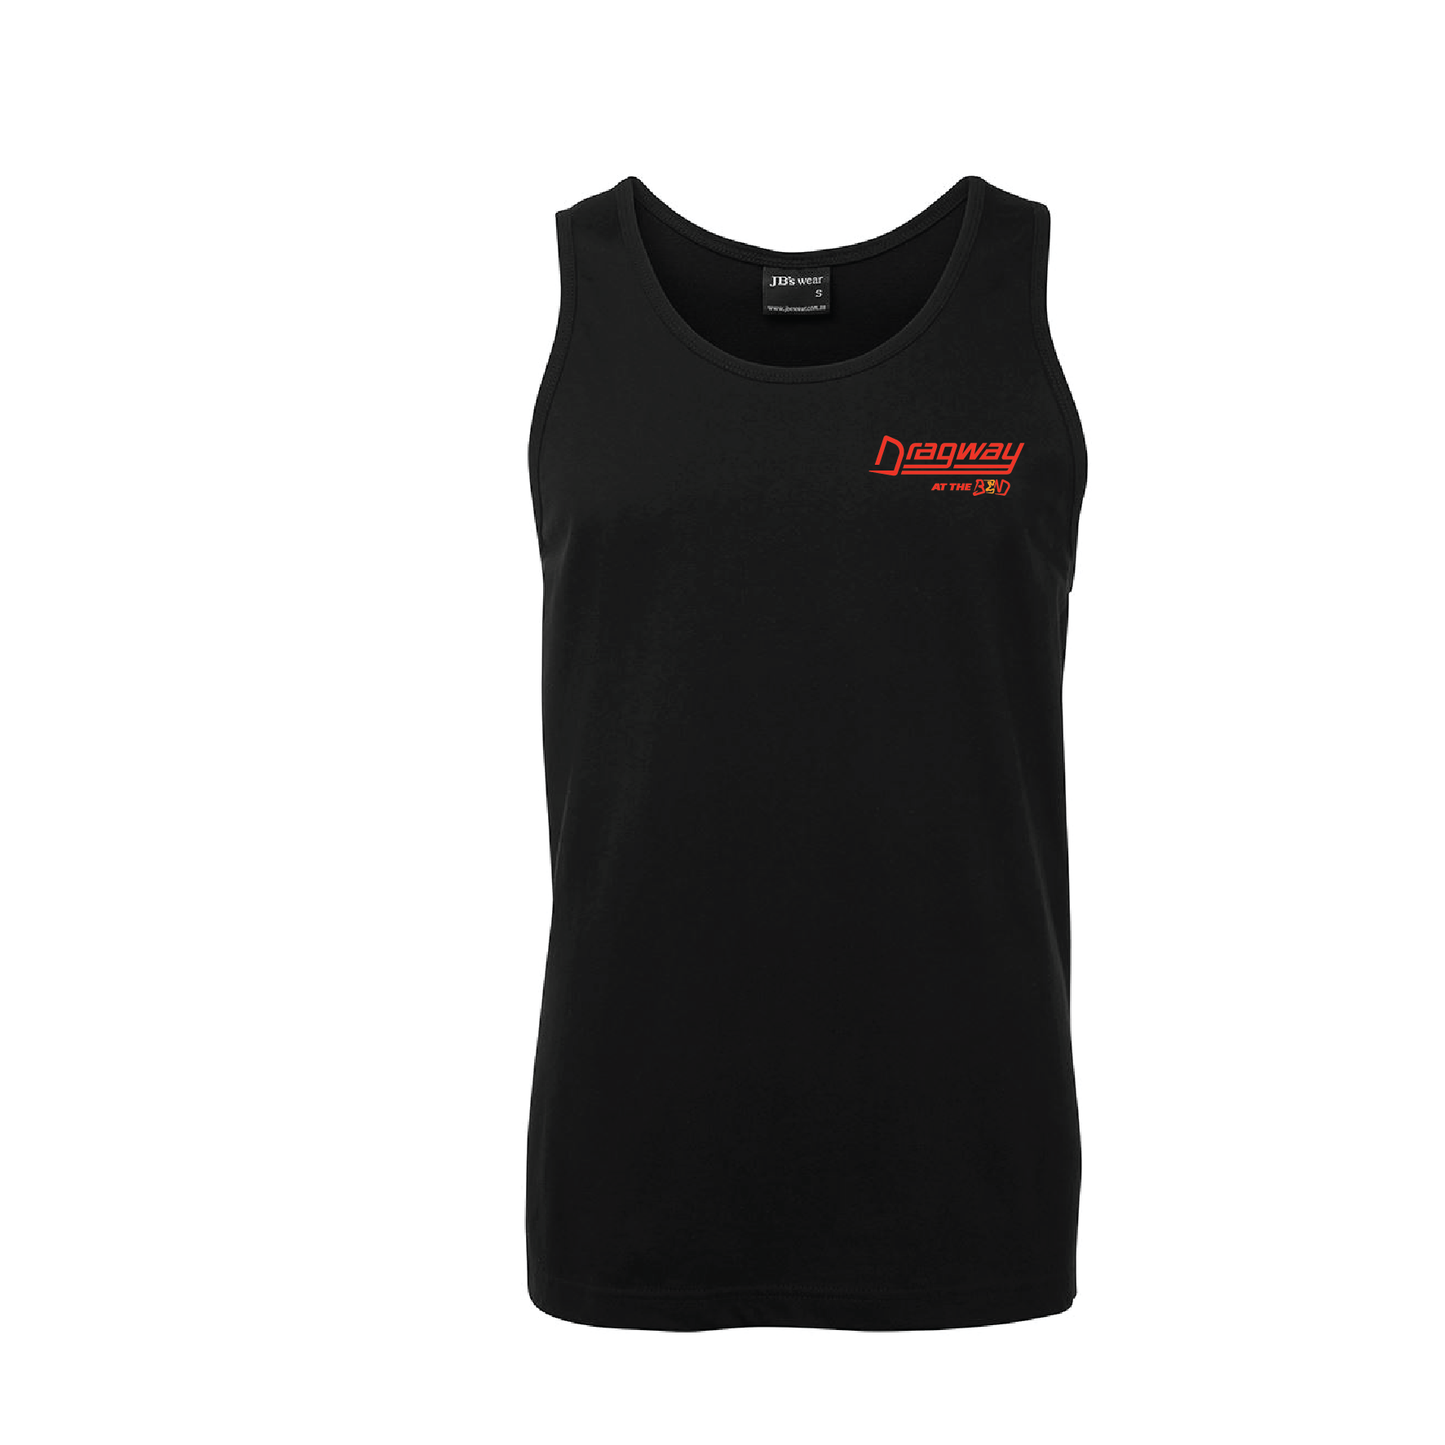 FESTIVAL STATE NATIONALS MENS SINGLET BLACK (available online only)